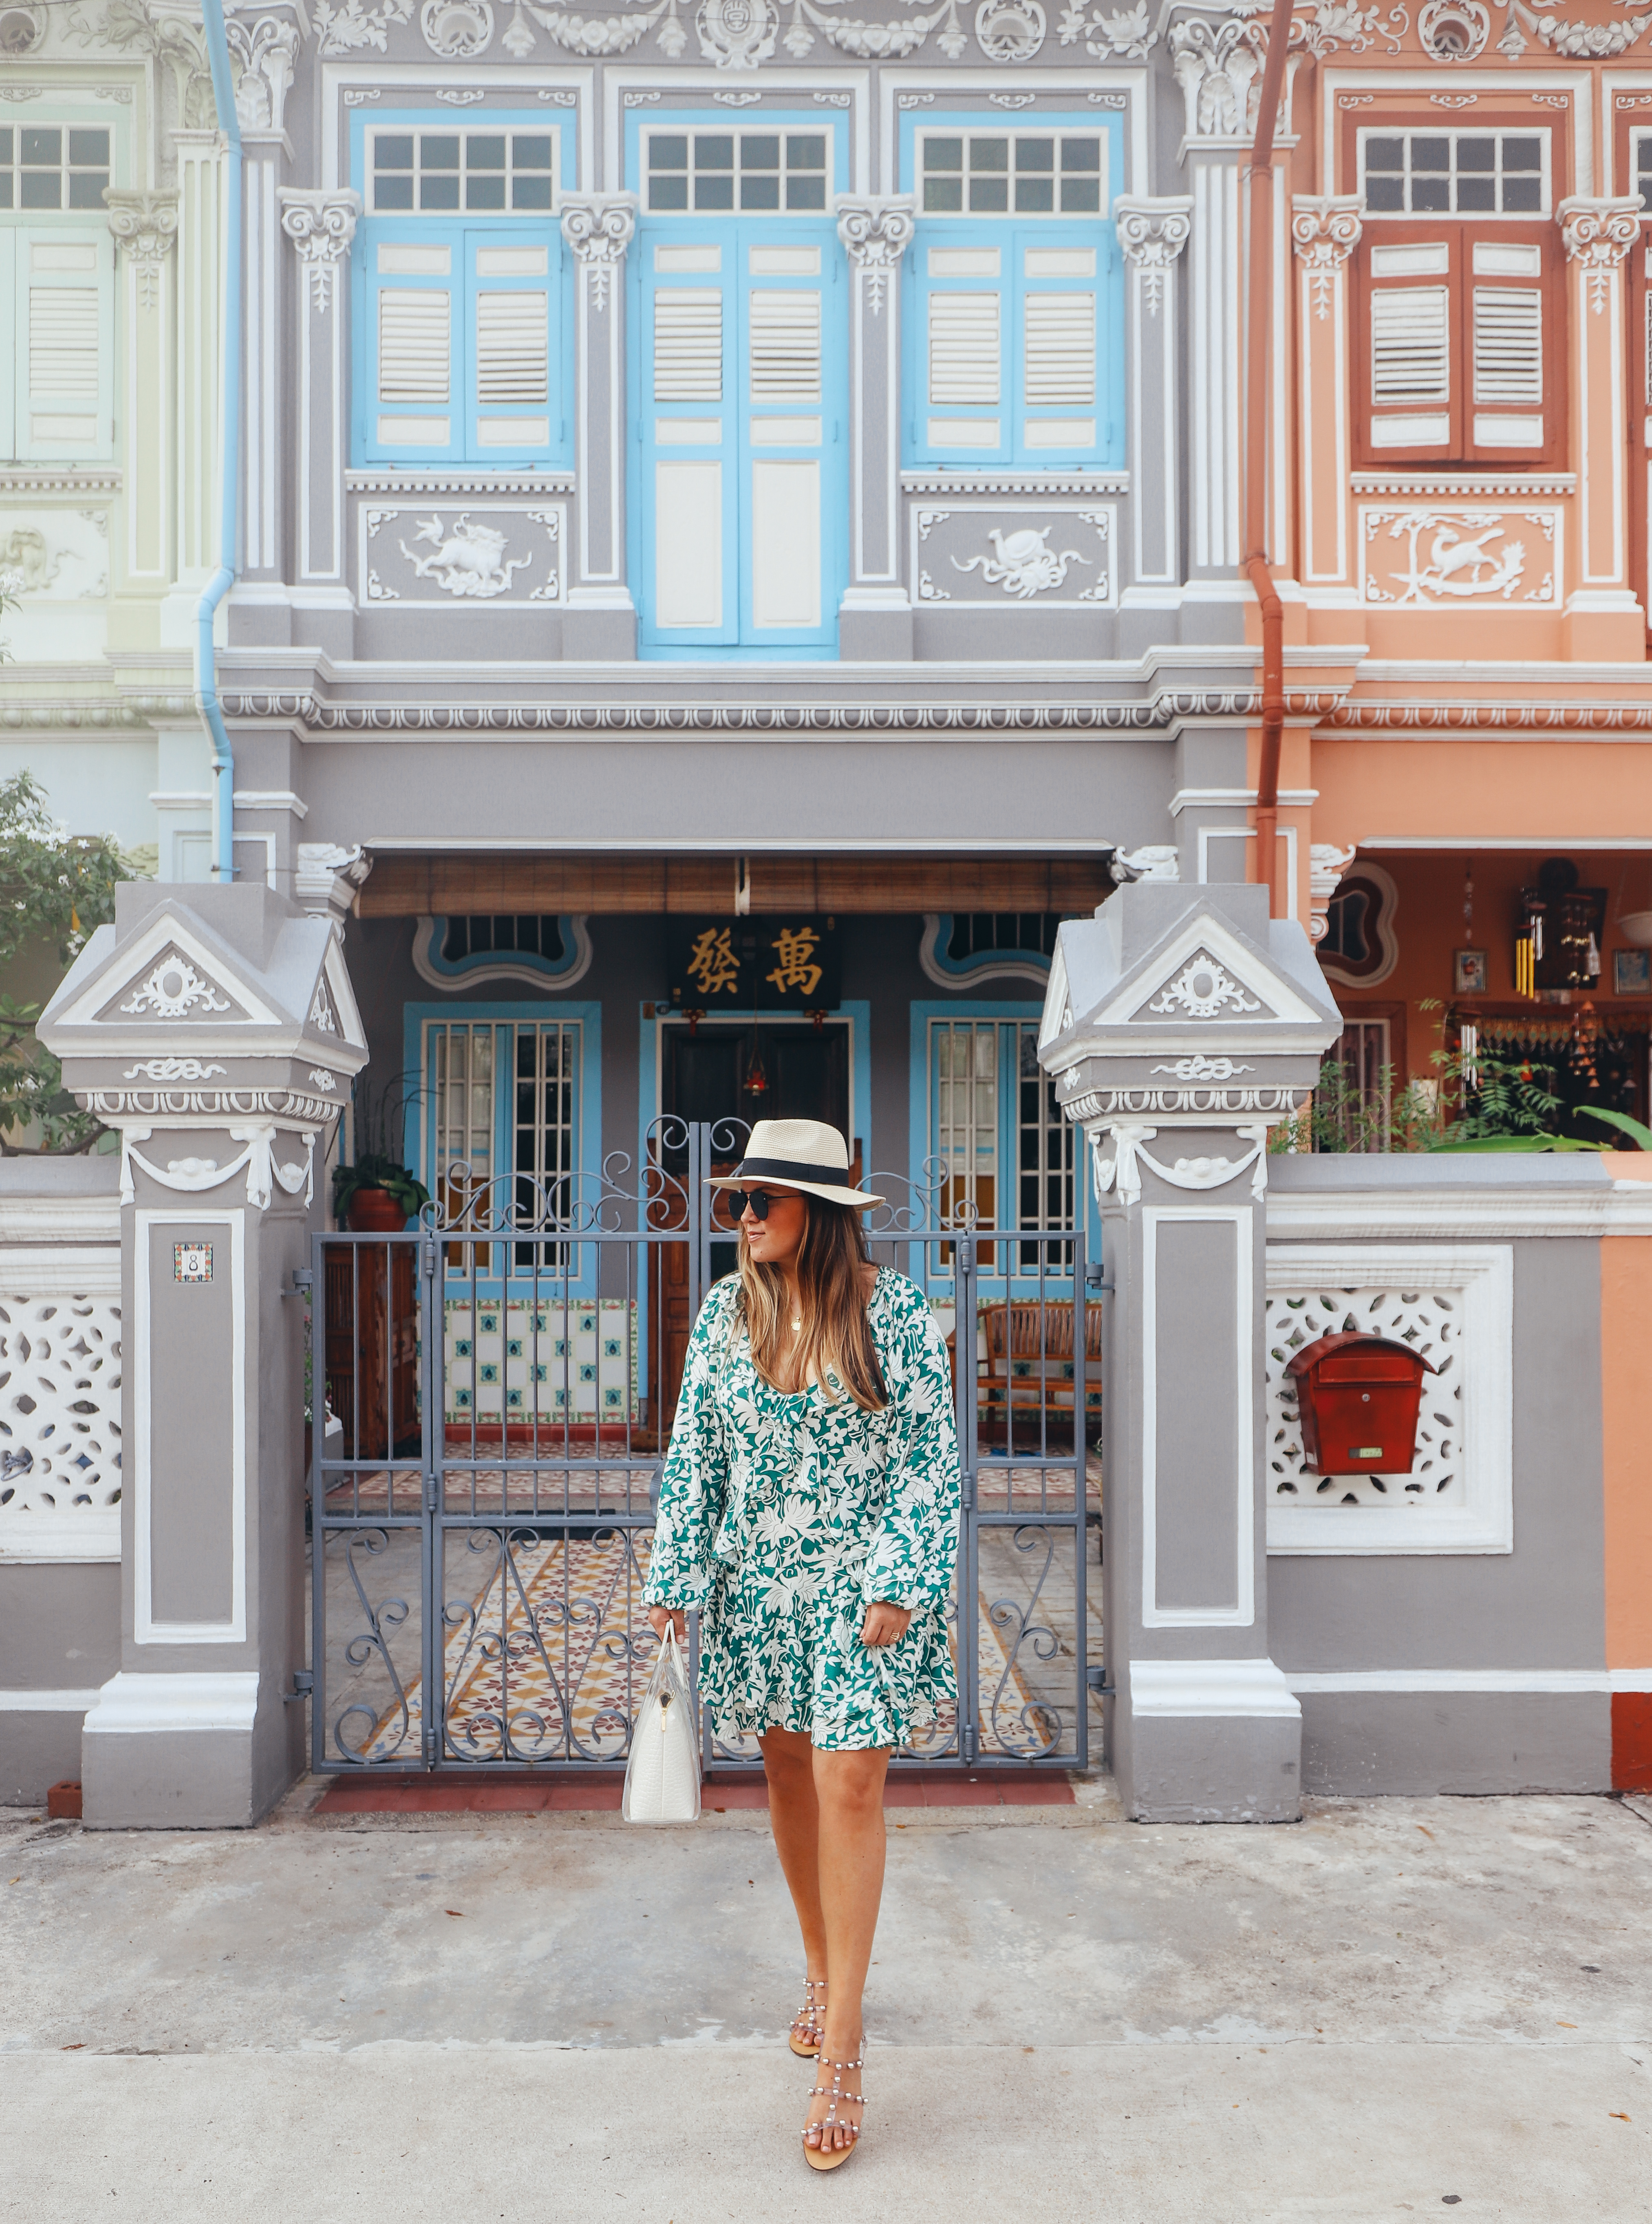 San Francisco blogger, Ashley Zeal, from Two Peas in a Prada shares her recommendations for 48 hours in Singapore. She is sharing where to stay, eat, shop and what to do.